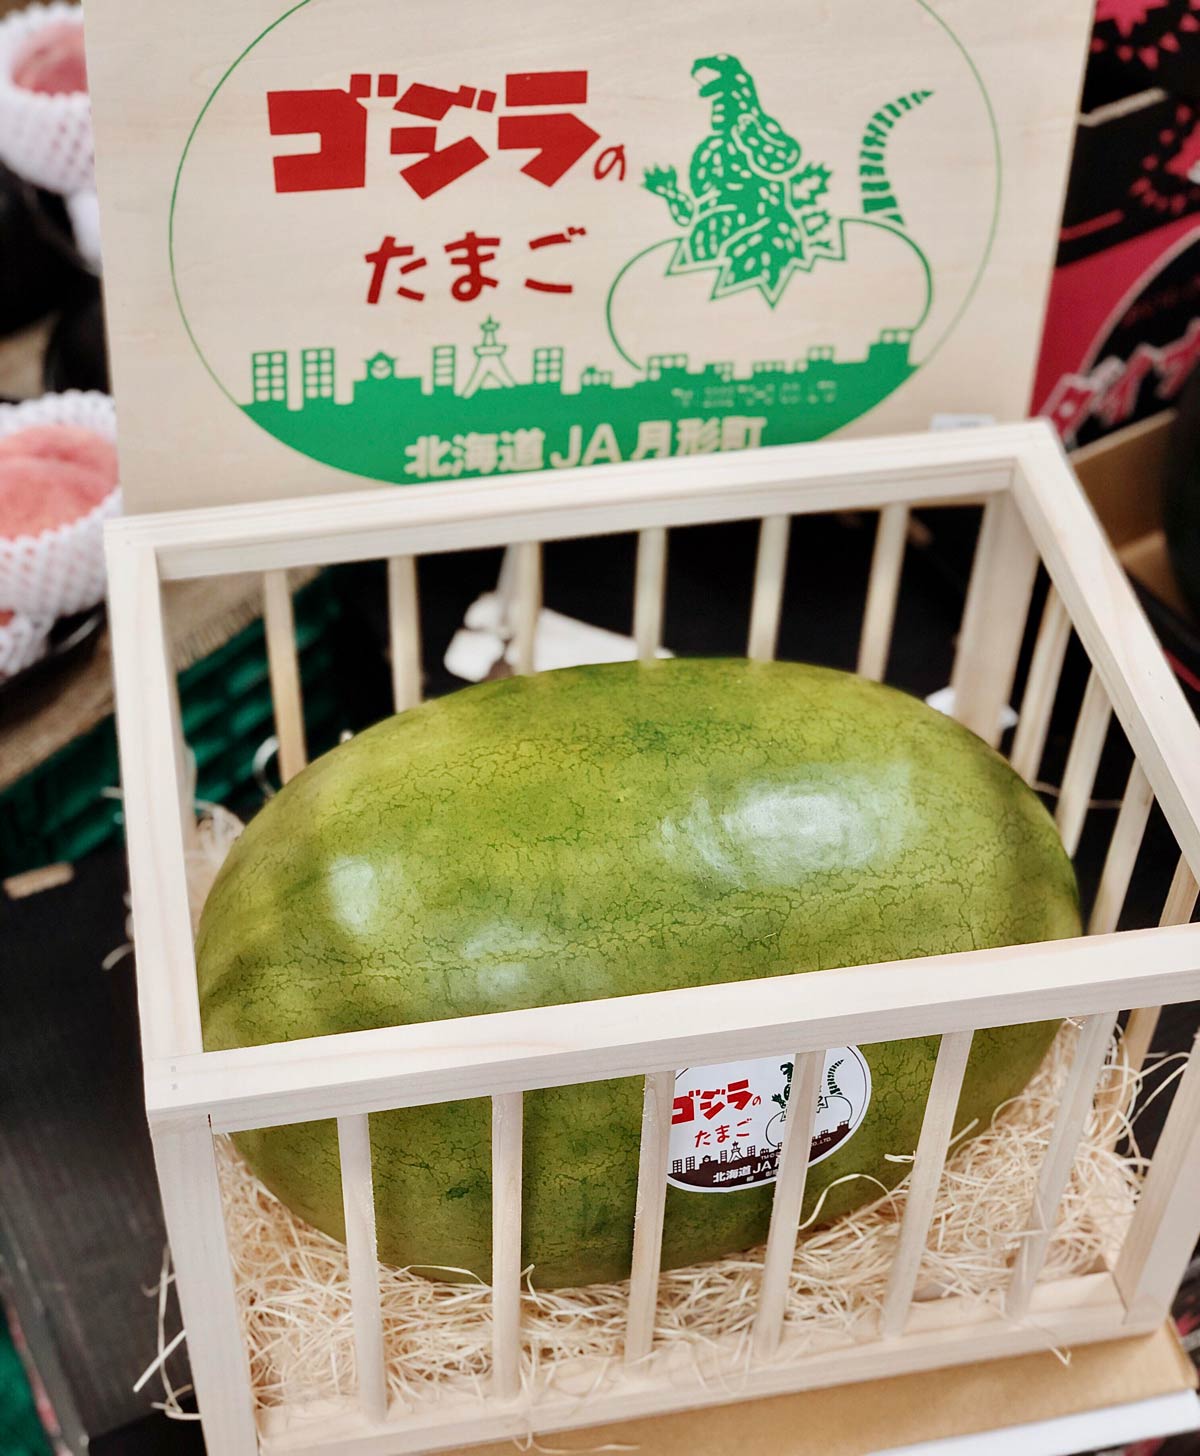 At our supermarket there’s a large watermelon in a cage. The sign says "Godzilla’s Egg"